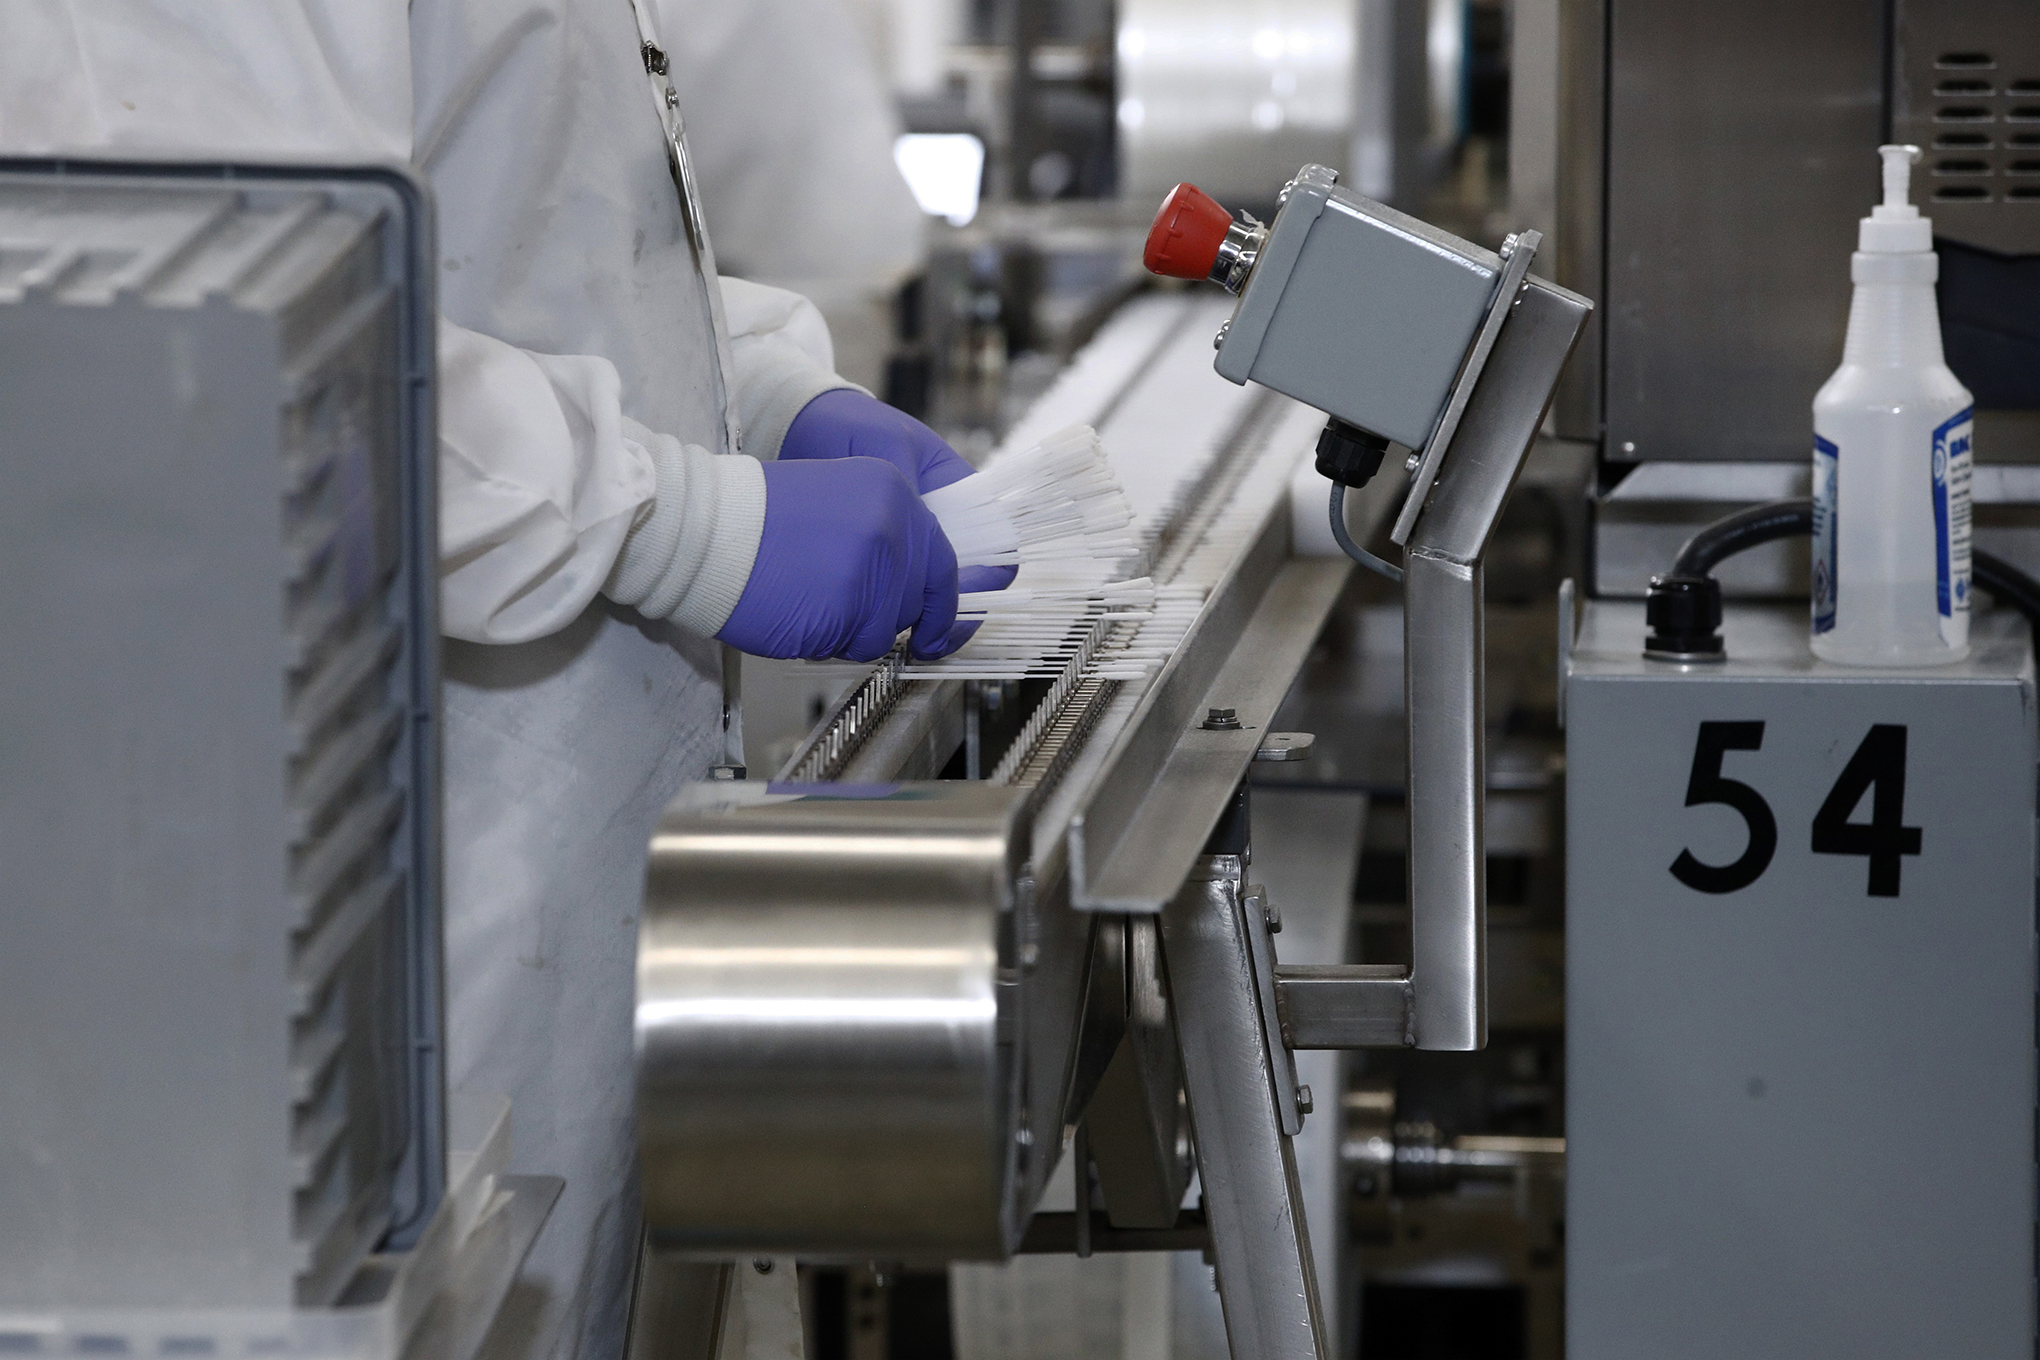 A worker places COVID-19 test swabs on a machine